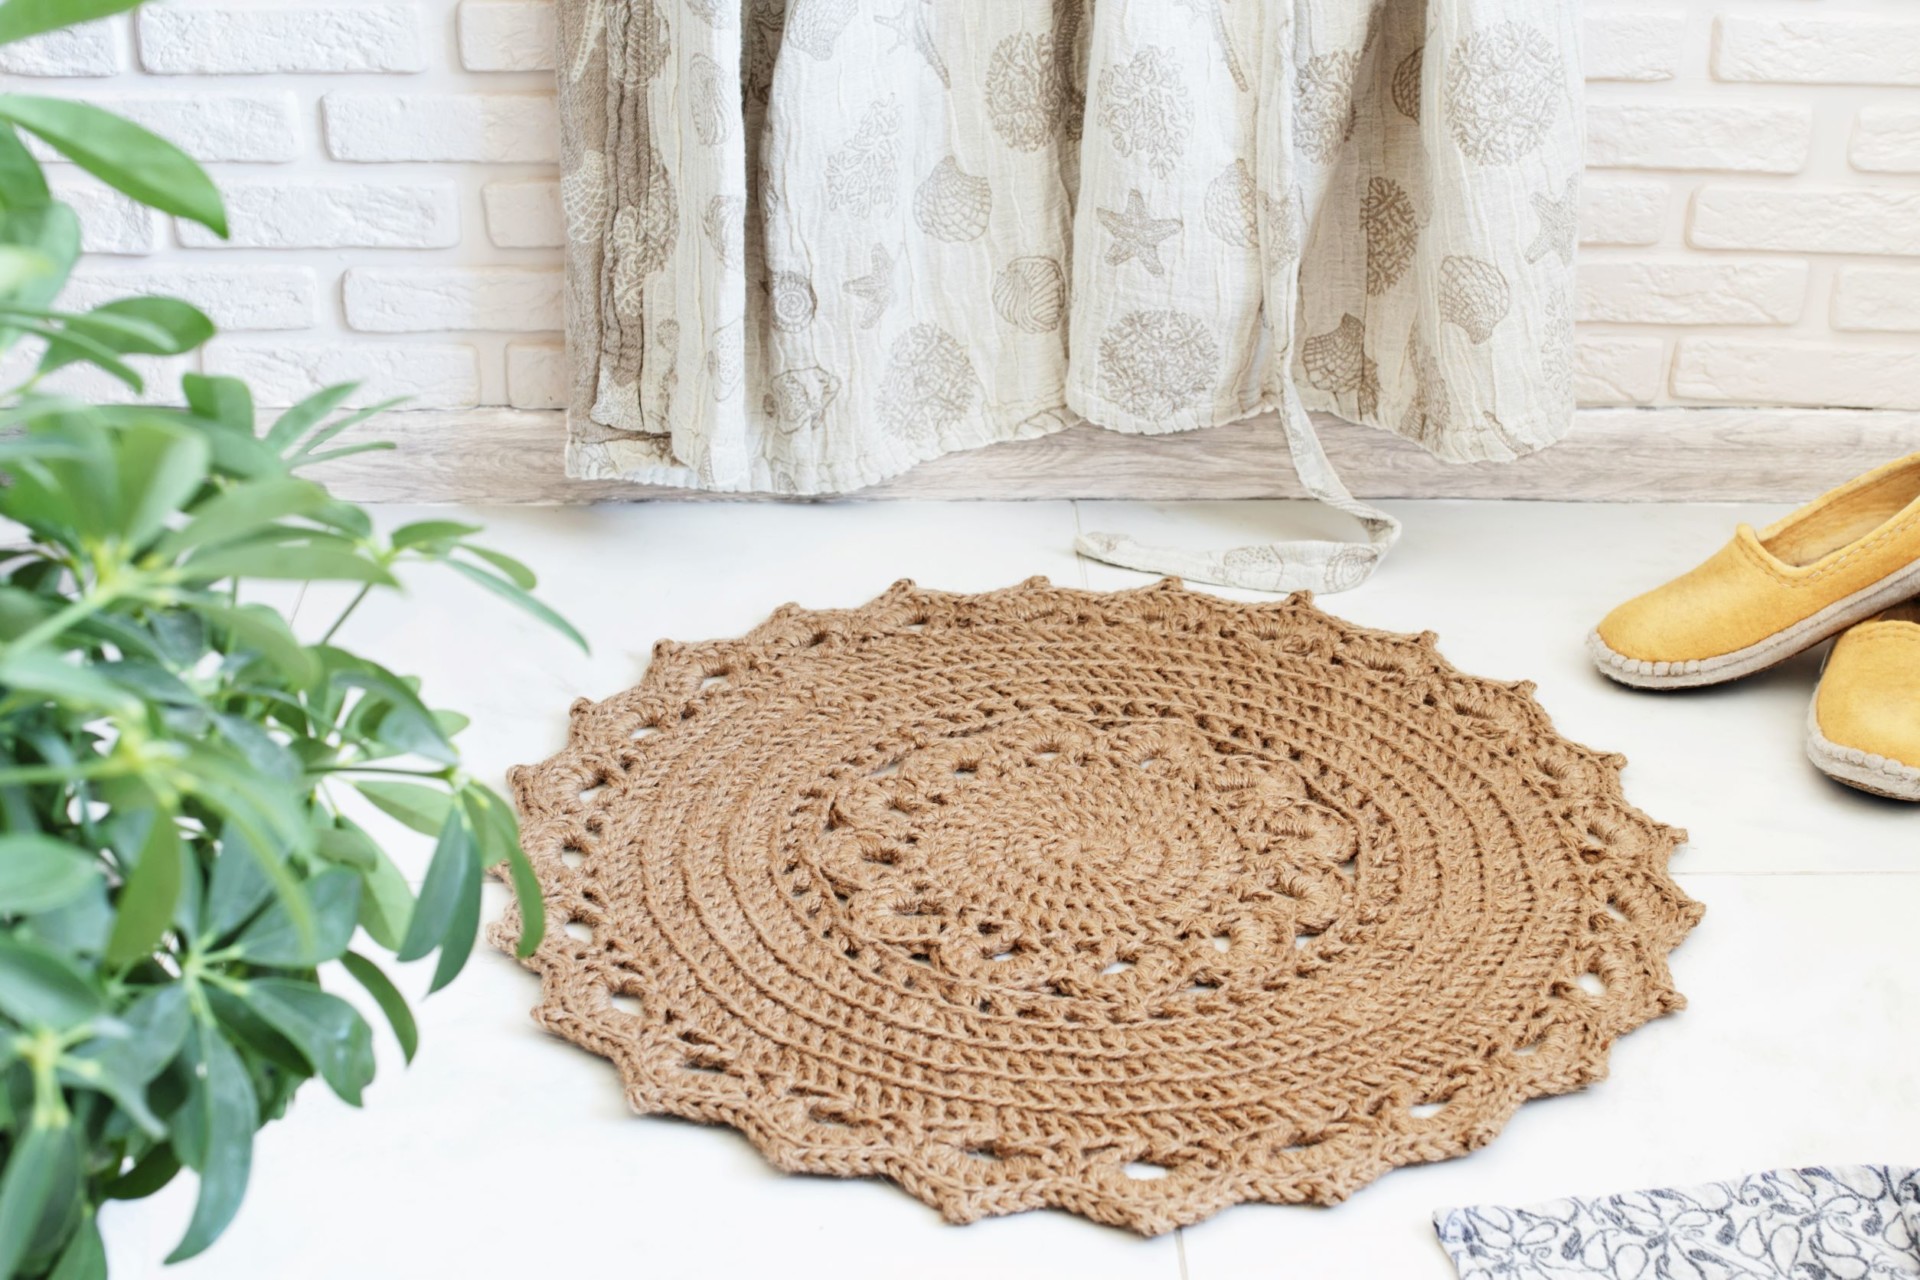 Are Jute Rugs Eco-Friendly